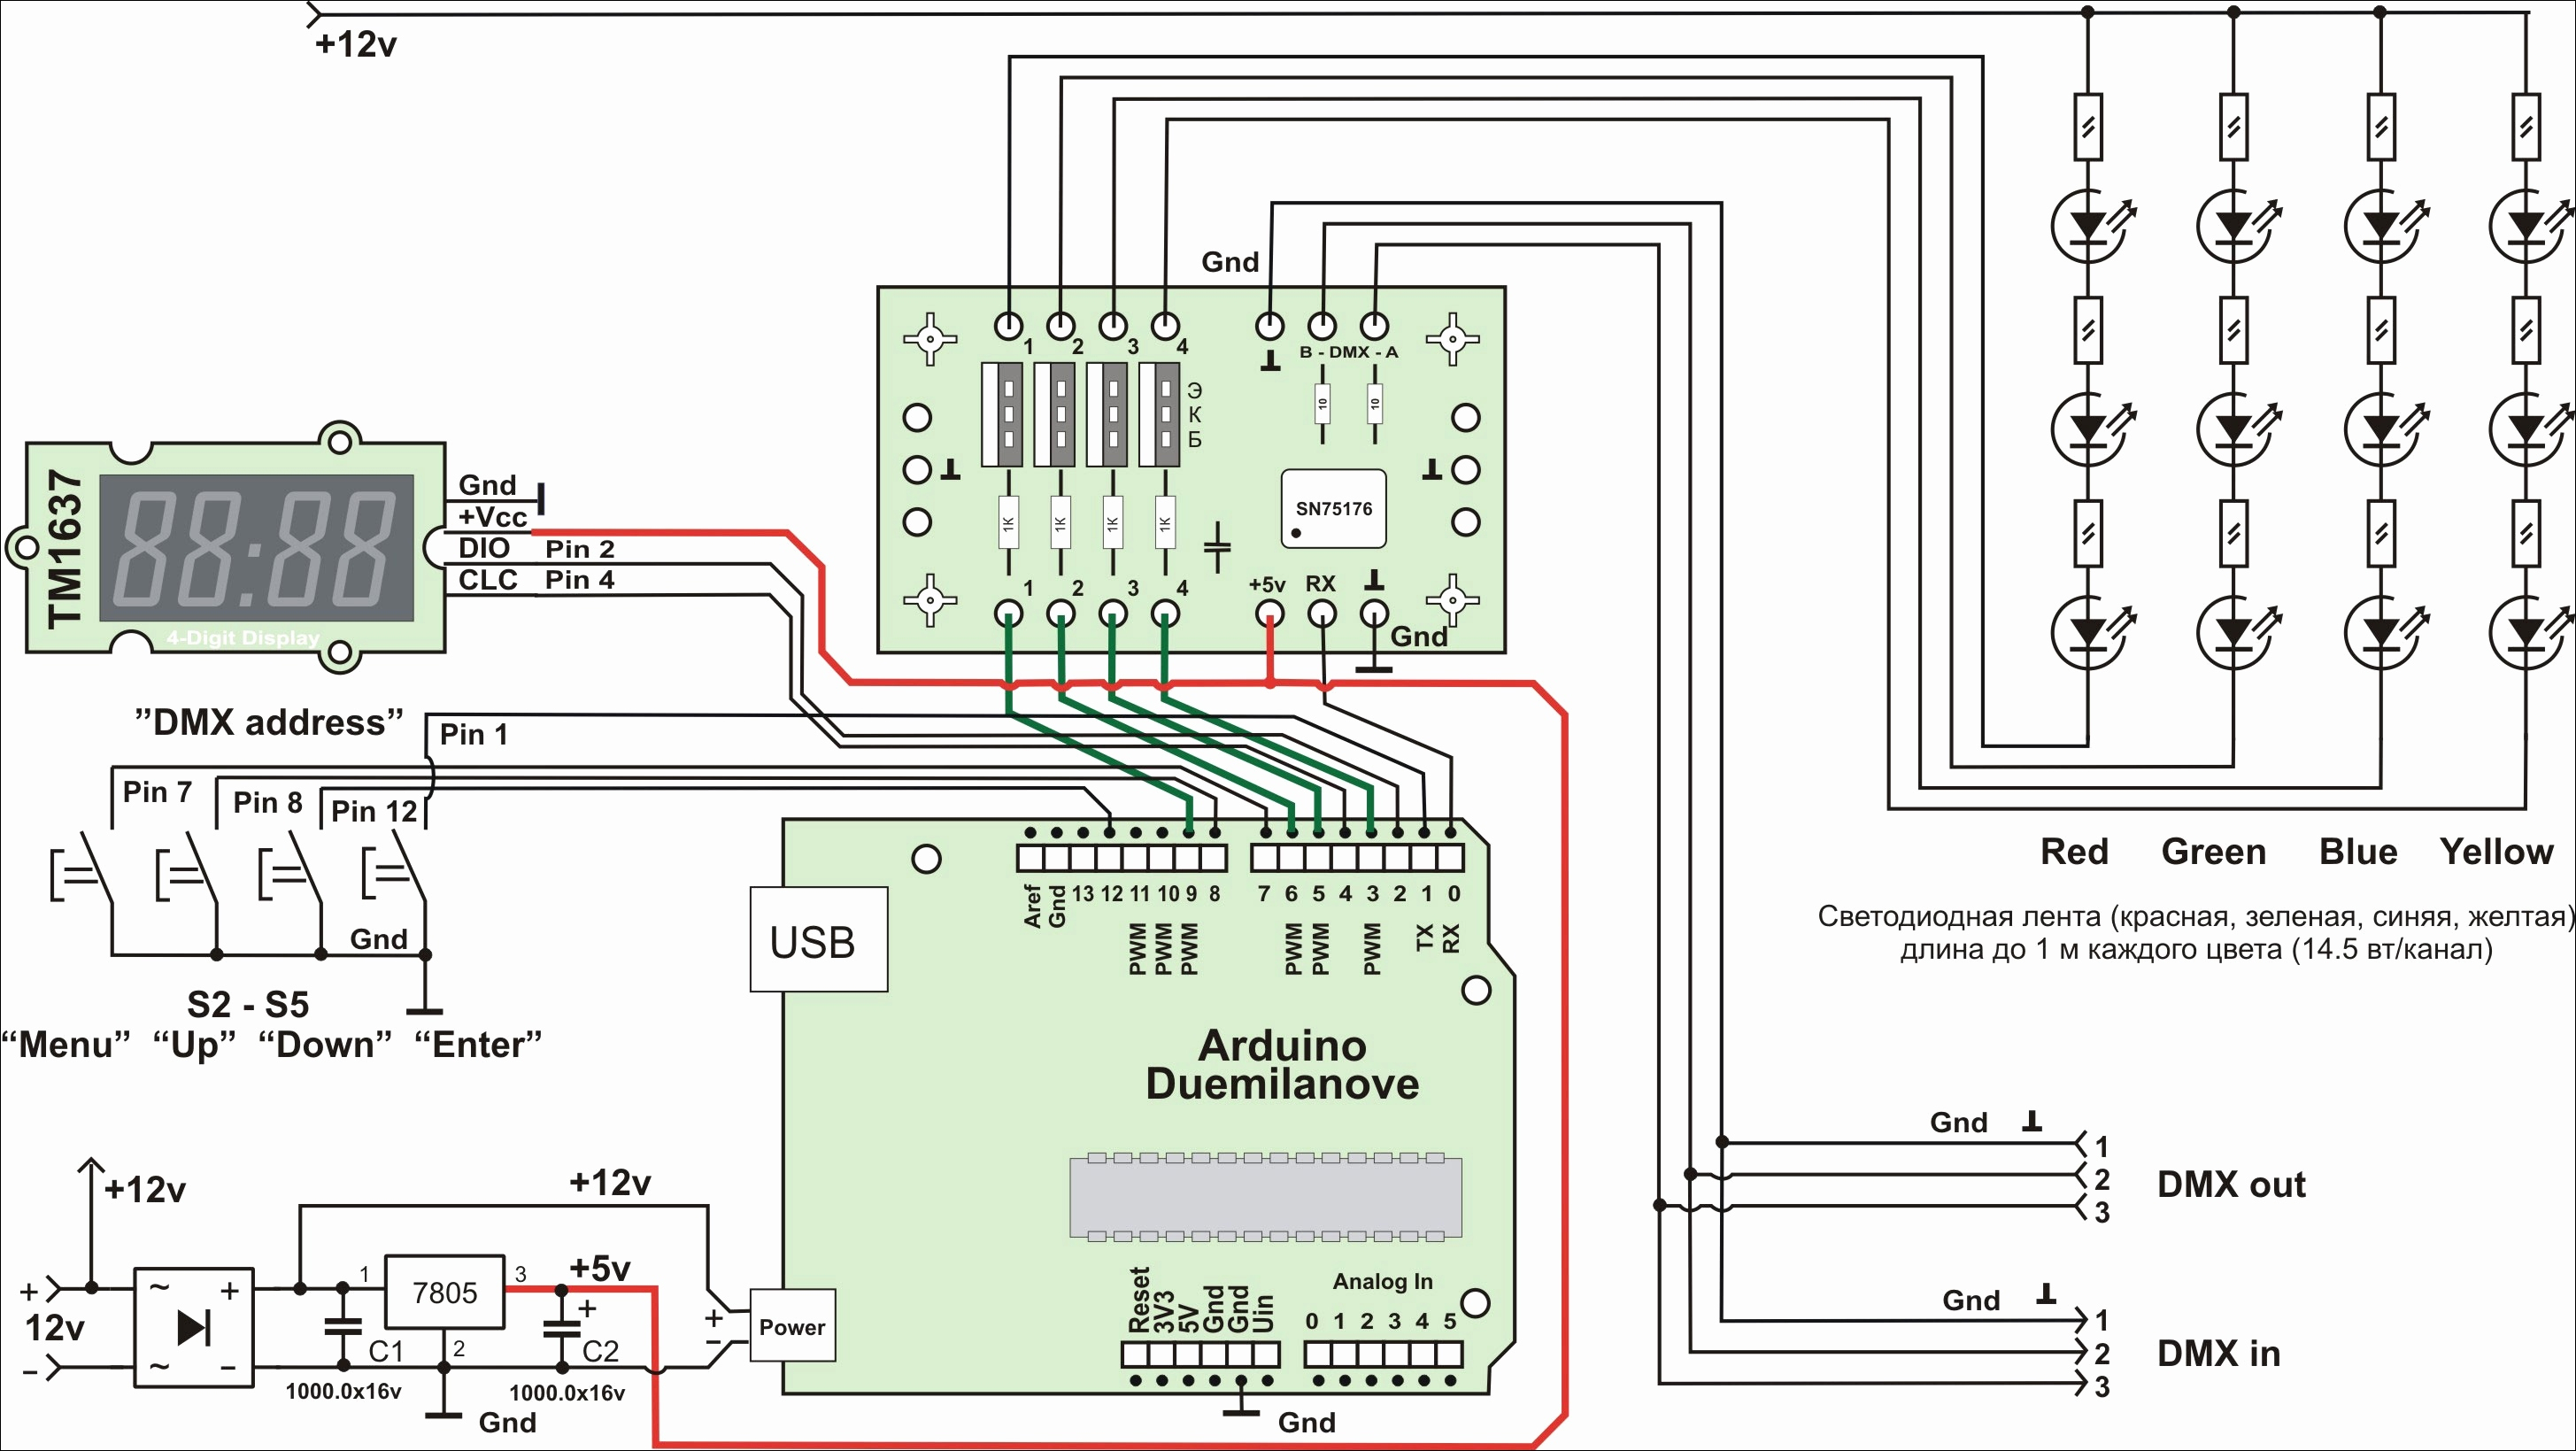 0 10 Volt Dimming Wiring Diagrams - All Wiring Diagram - 0-10 Volt Dimming Wiring Diagram